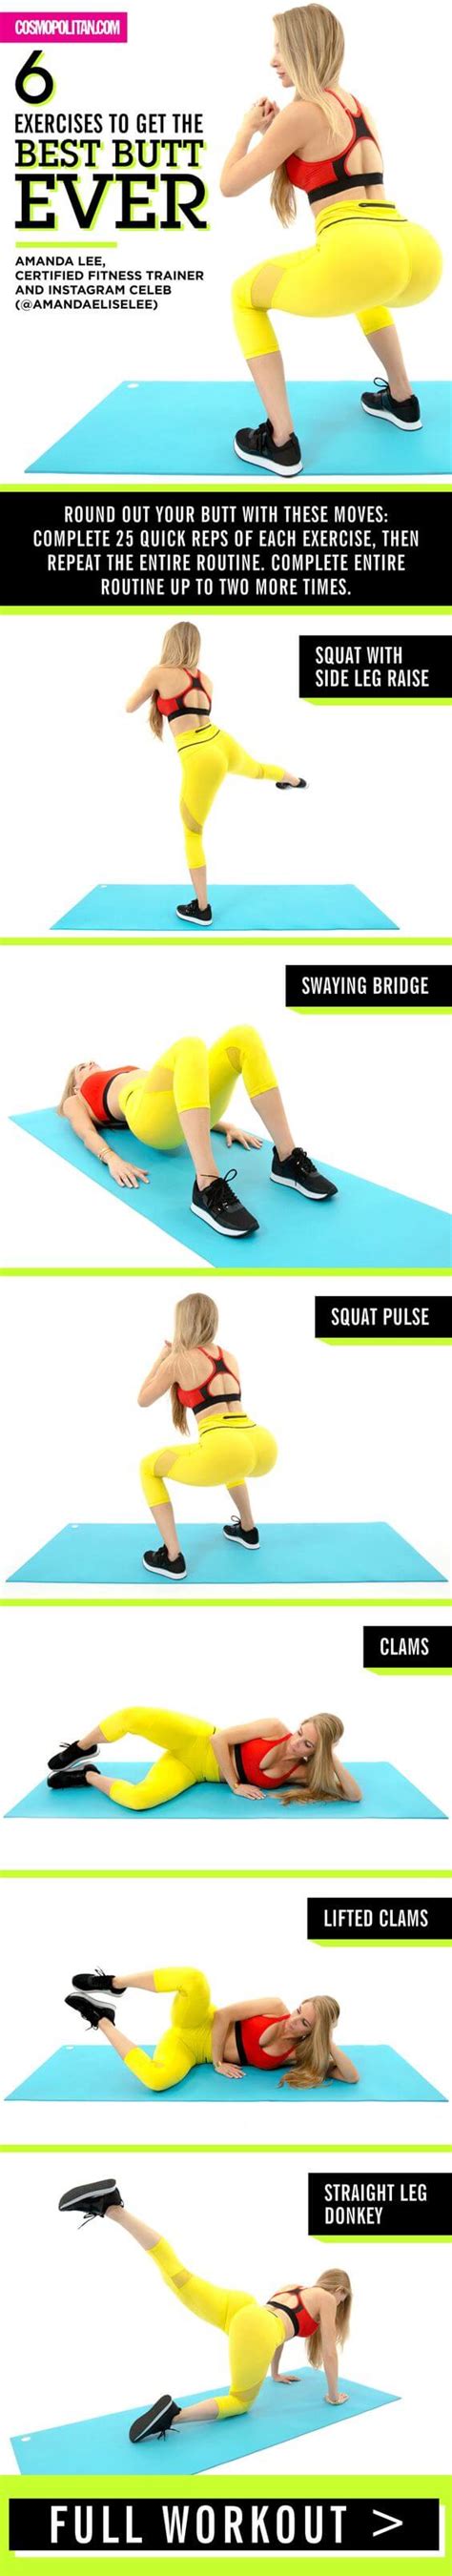 Top 8 Butt Workout Programs To Tone Up Your Butt